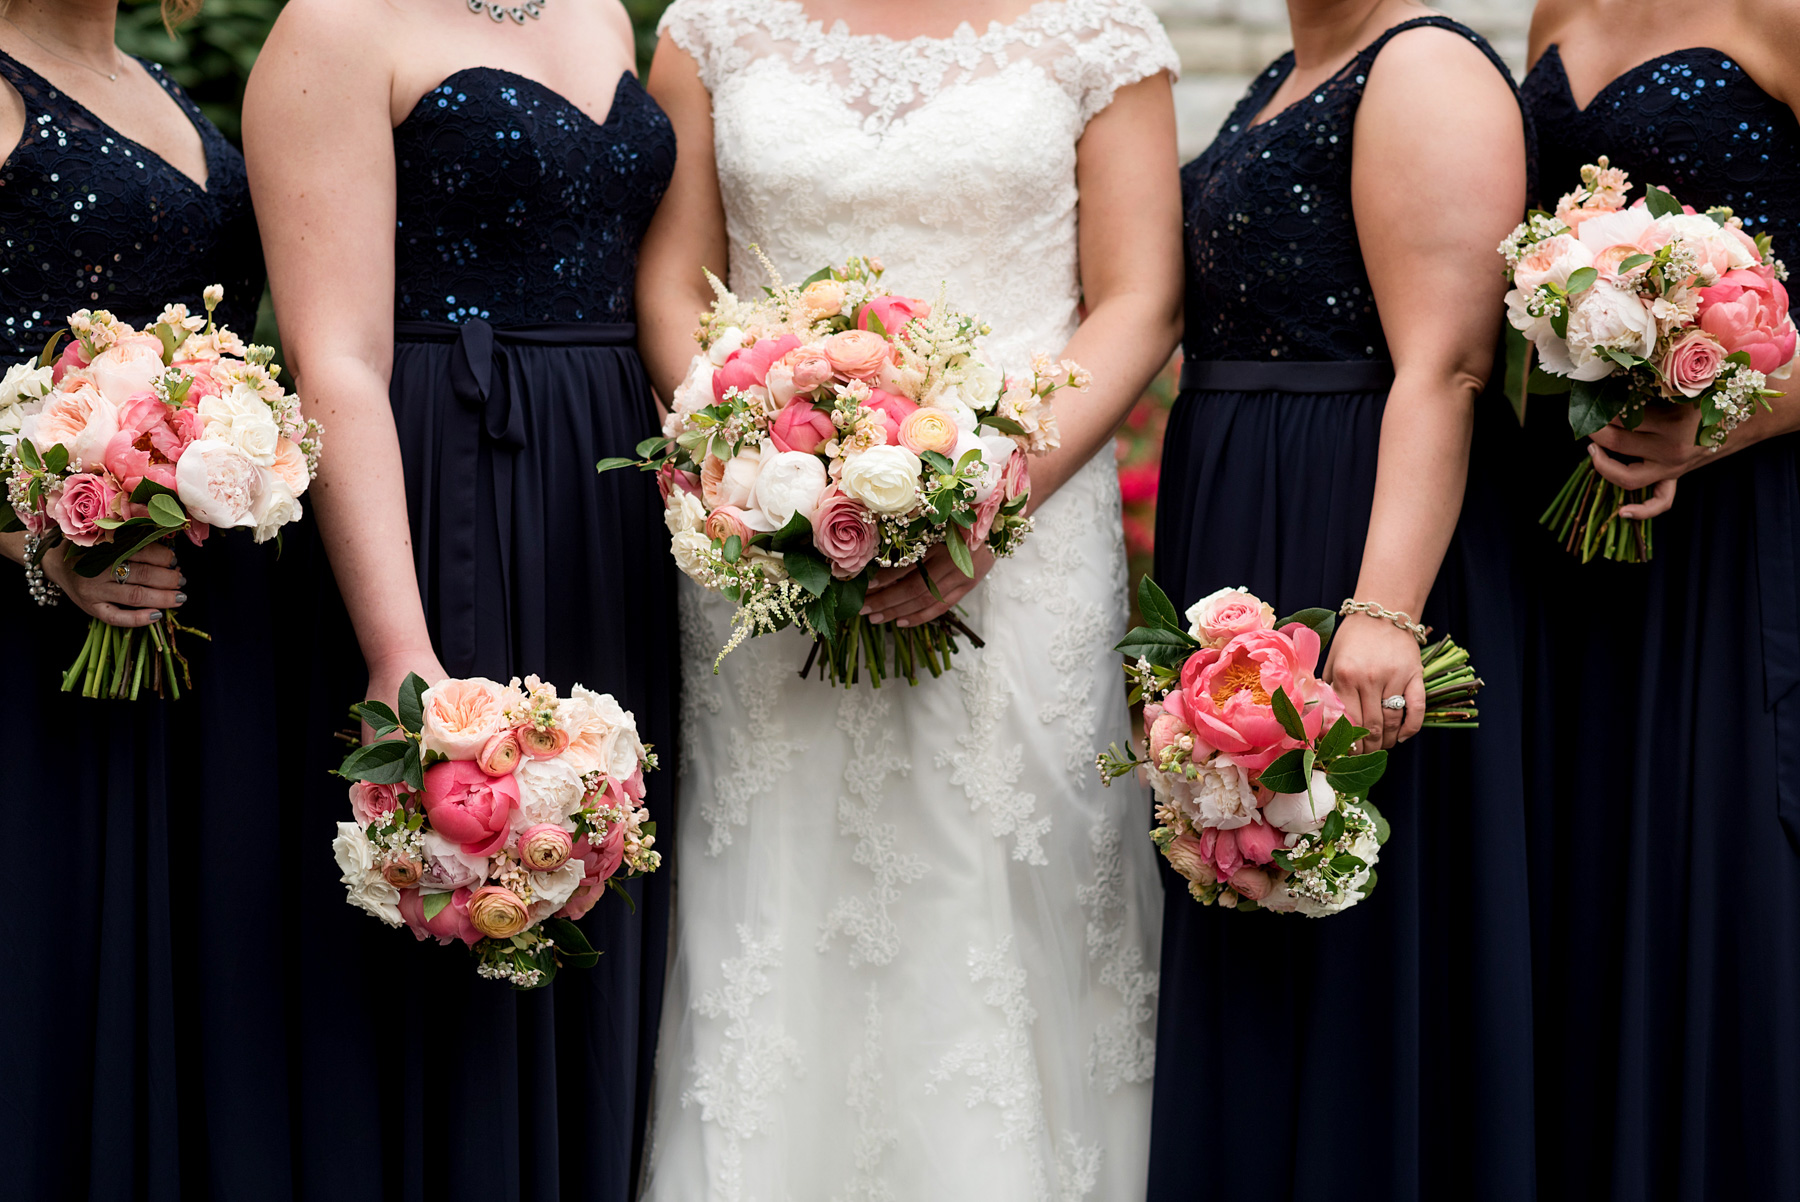 photo of bouquets by ashley fisher photography